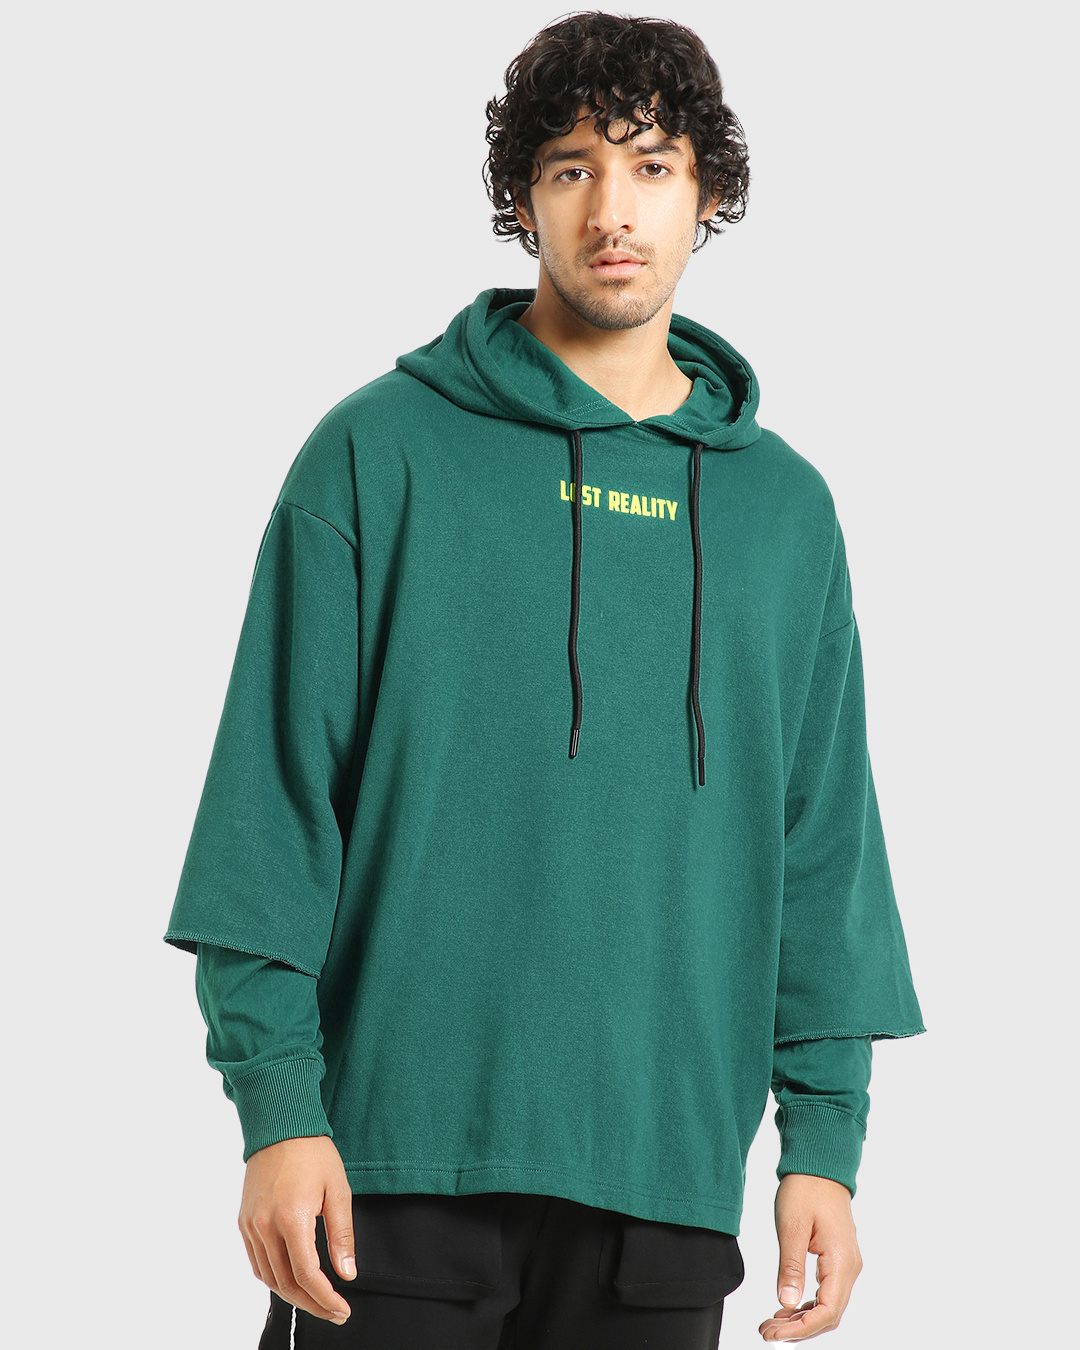 Shop Men's Green Lost Reality Typography Super Loose Fit Hoodie-Back